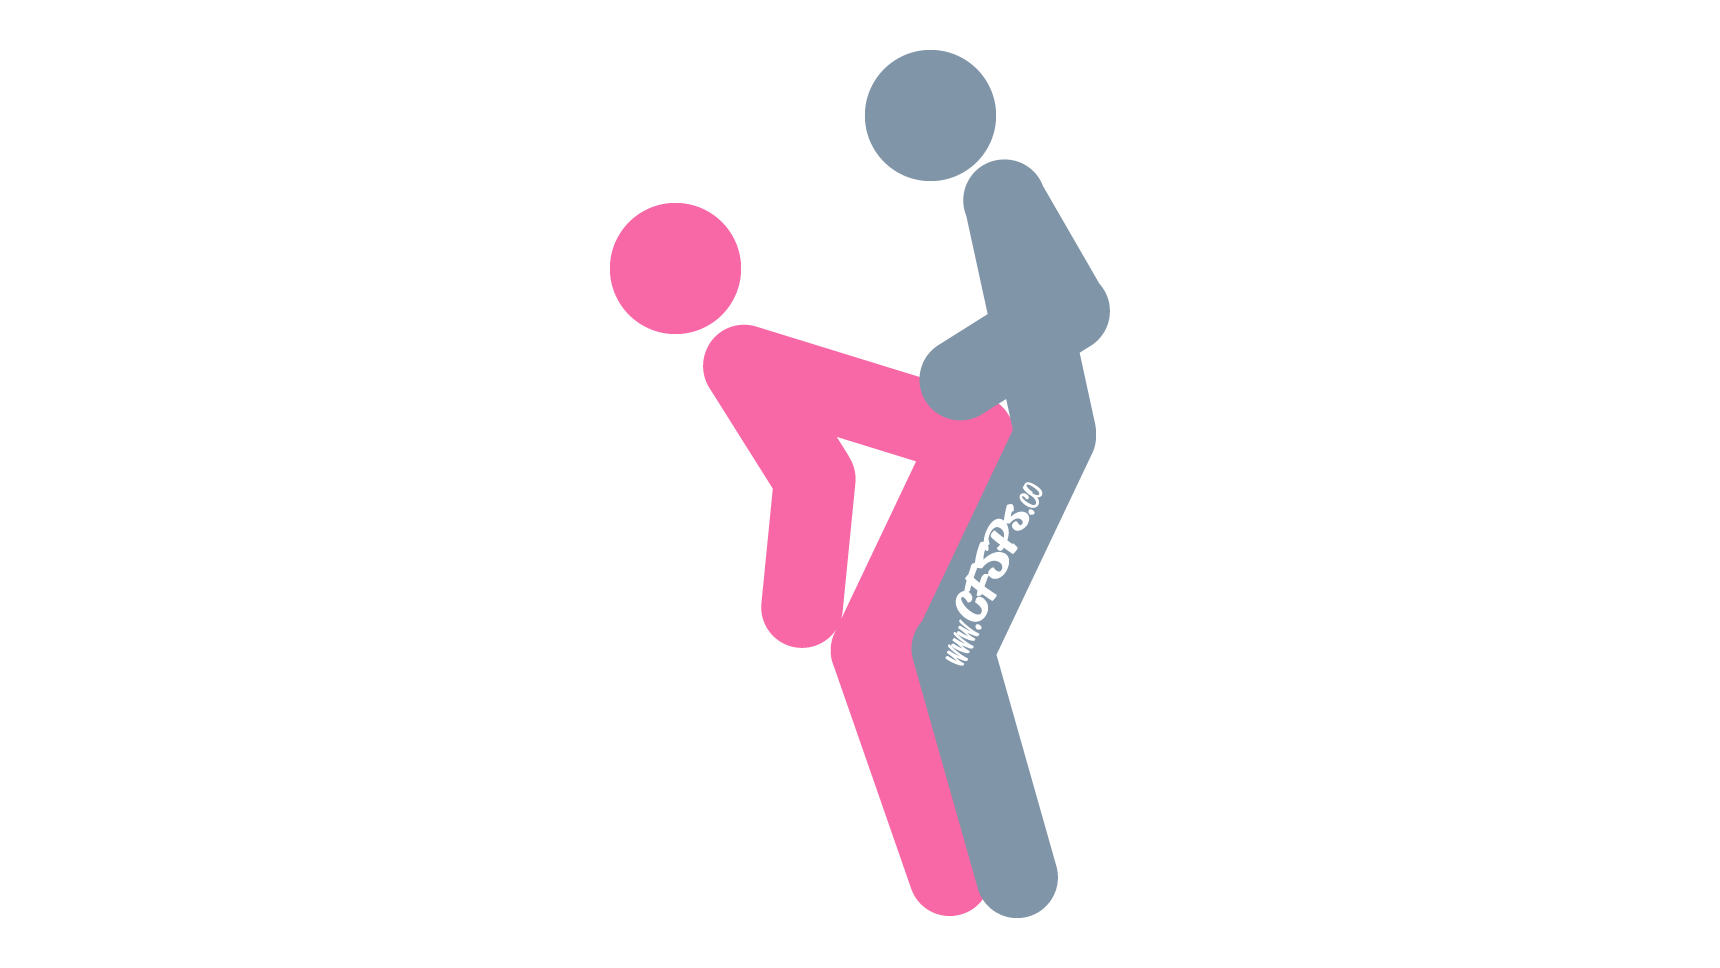 This stick figure image depicts a man and woman having sex in the Fast and Furious sex position. The woman is standing with her knees bent a little, leaning forward, and supporting her upper body with her hands on her knees. The husband is standing behind her and holding onto her hips.